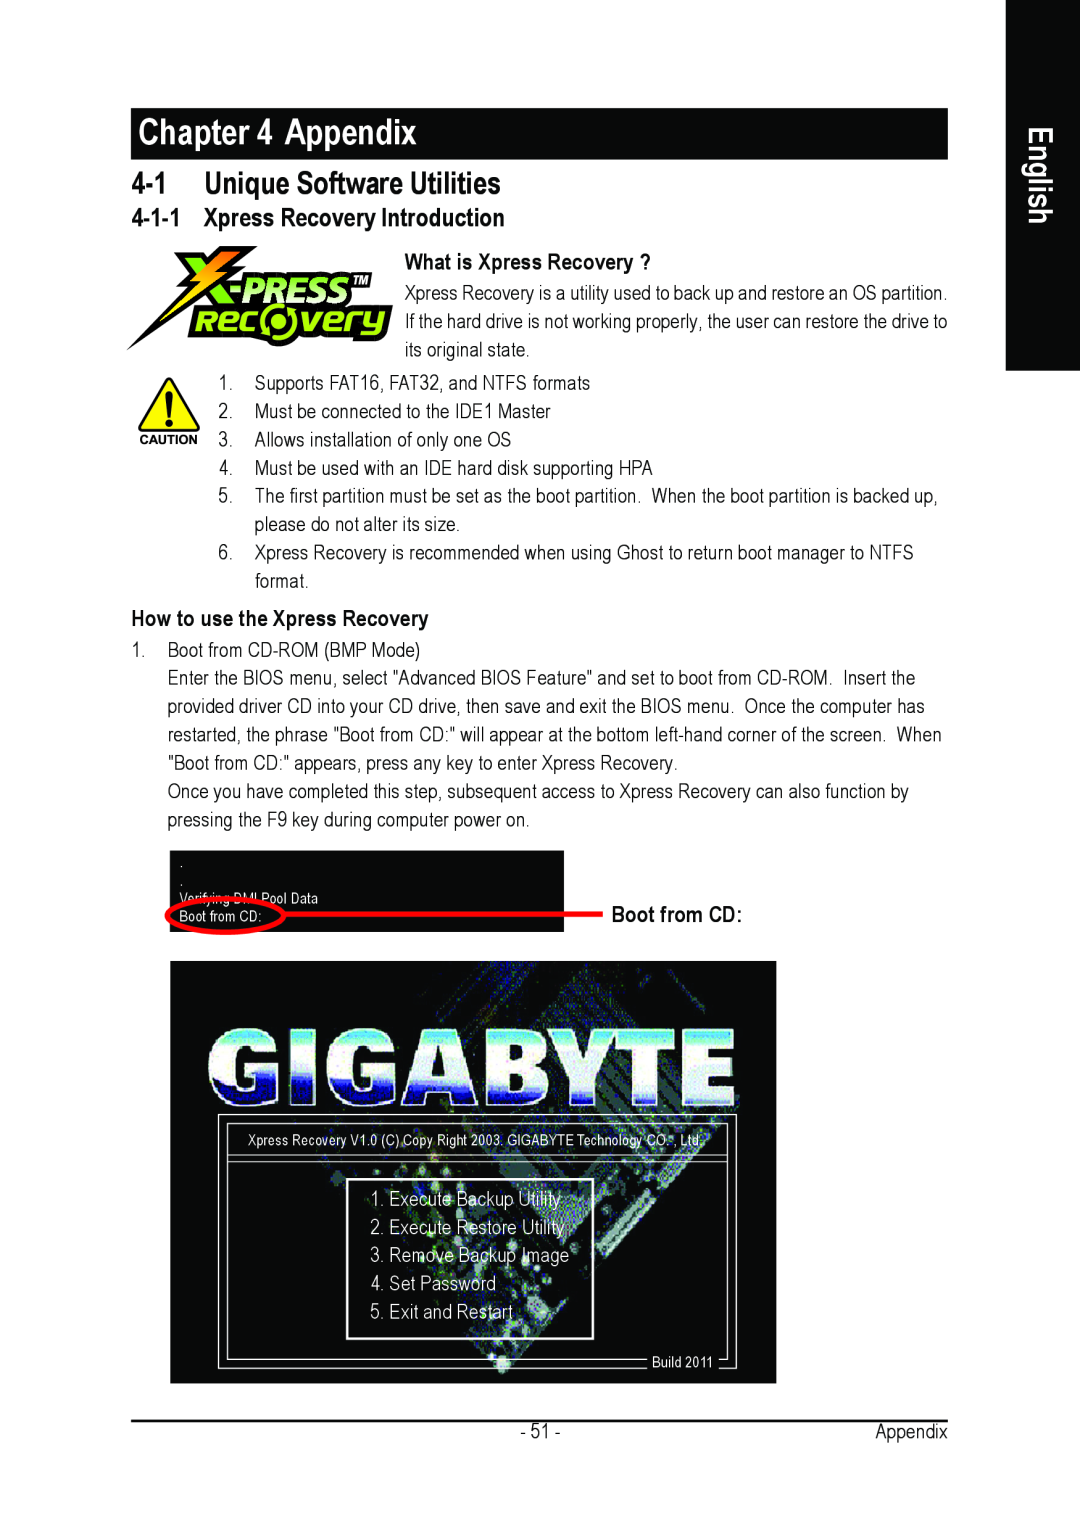 Gigabyte GA-7N400S Appendix, Unique Software Utilities, Xpress Recovery Introduction, What is Xpress Recovery ?, English 